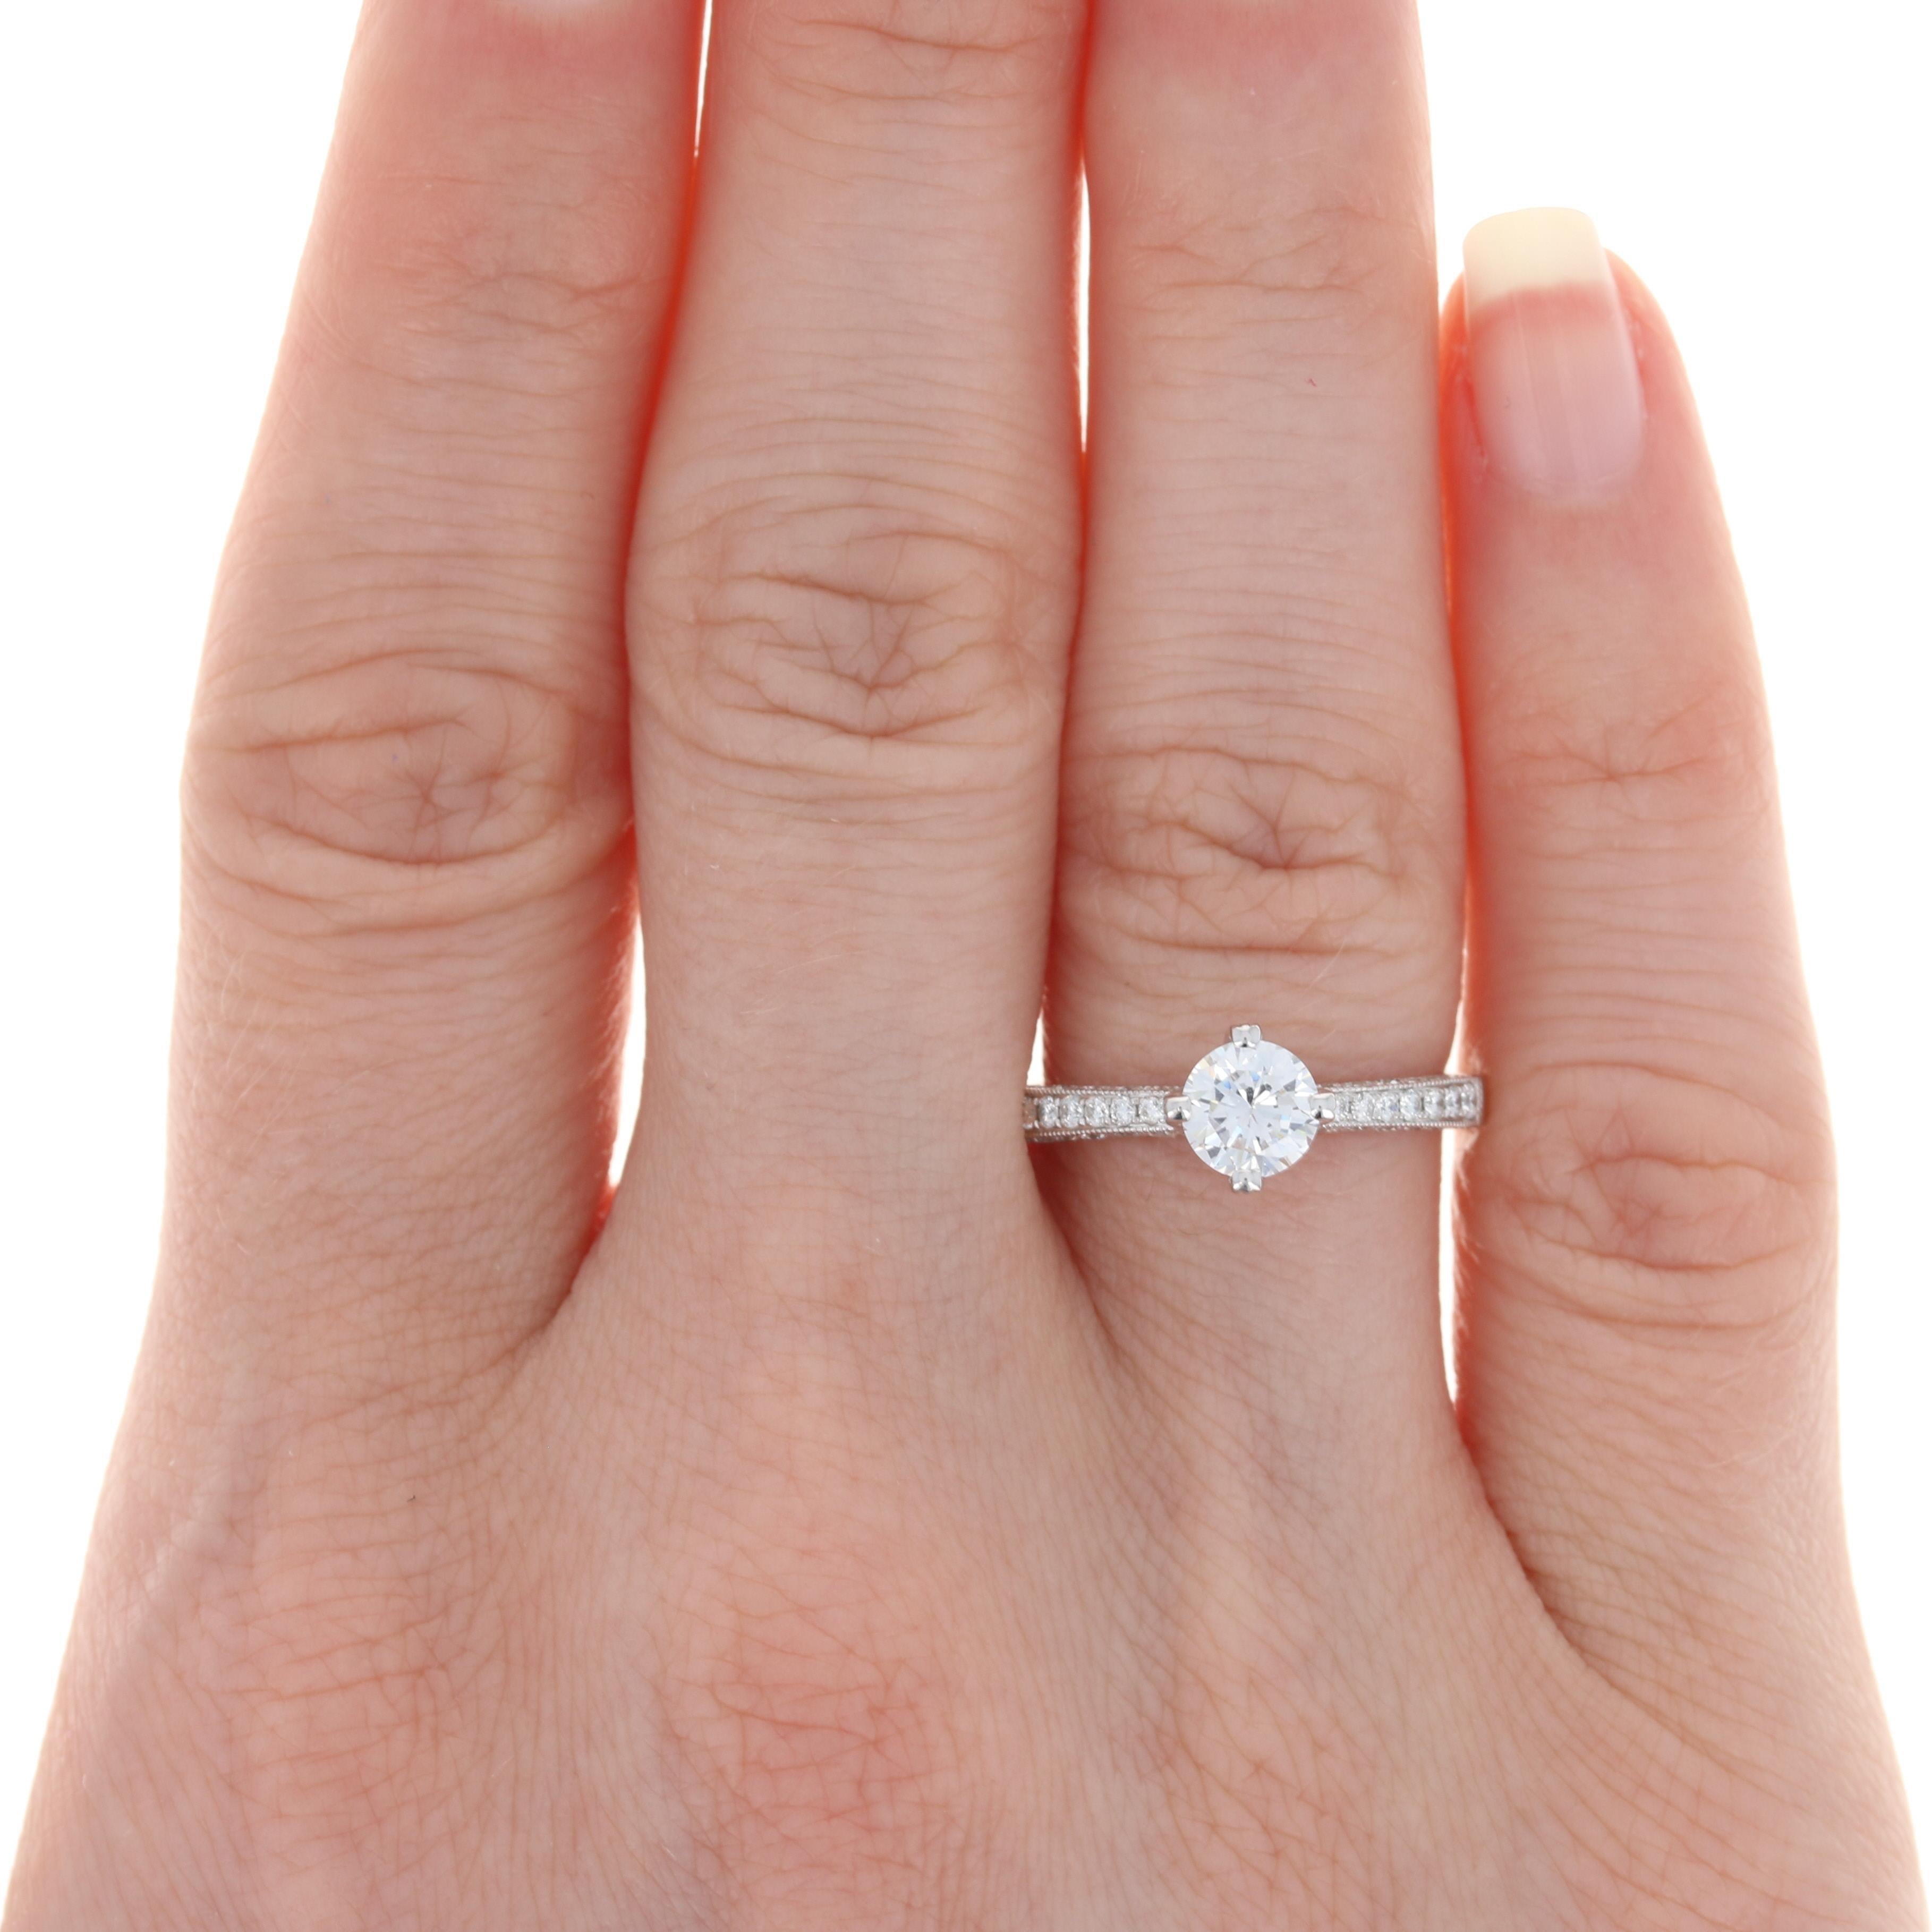 Your bride-to-be is sure to absolutely adore this gorgeous NEW semi-mount engagement ring! Crafted in glistening 14k white gold, this piece showcases a dazzling array of icy white diamond accents outlined by milgrain detailing that will elegantly